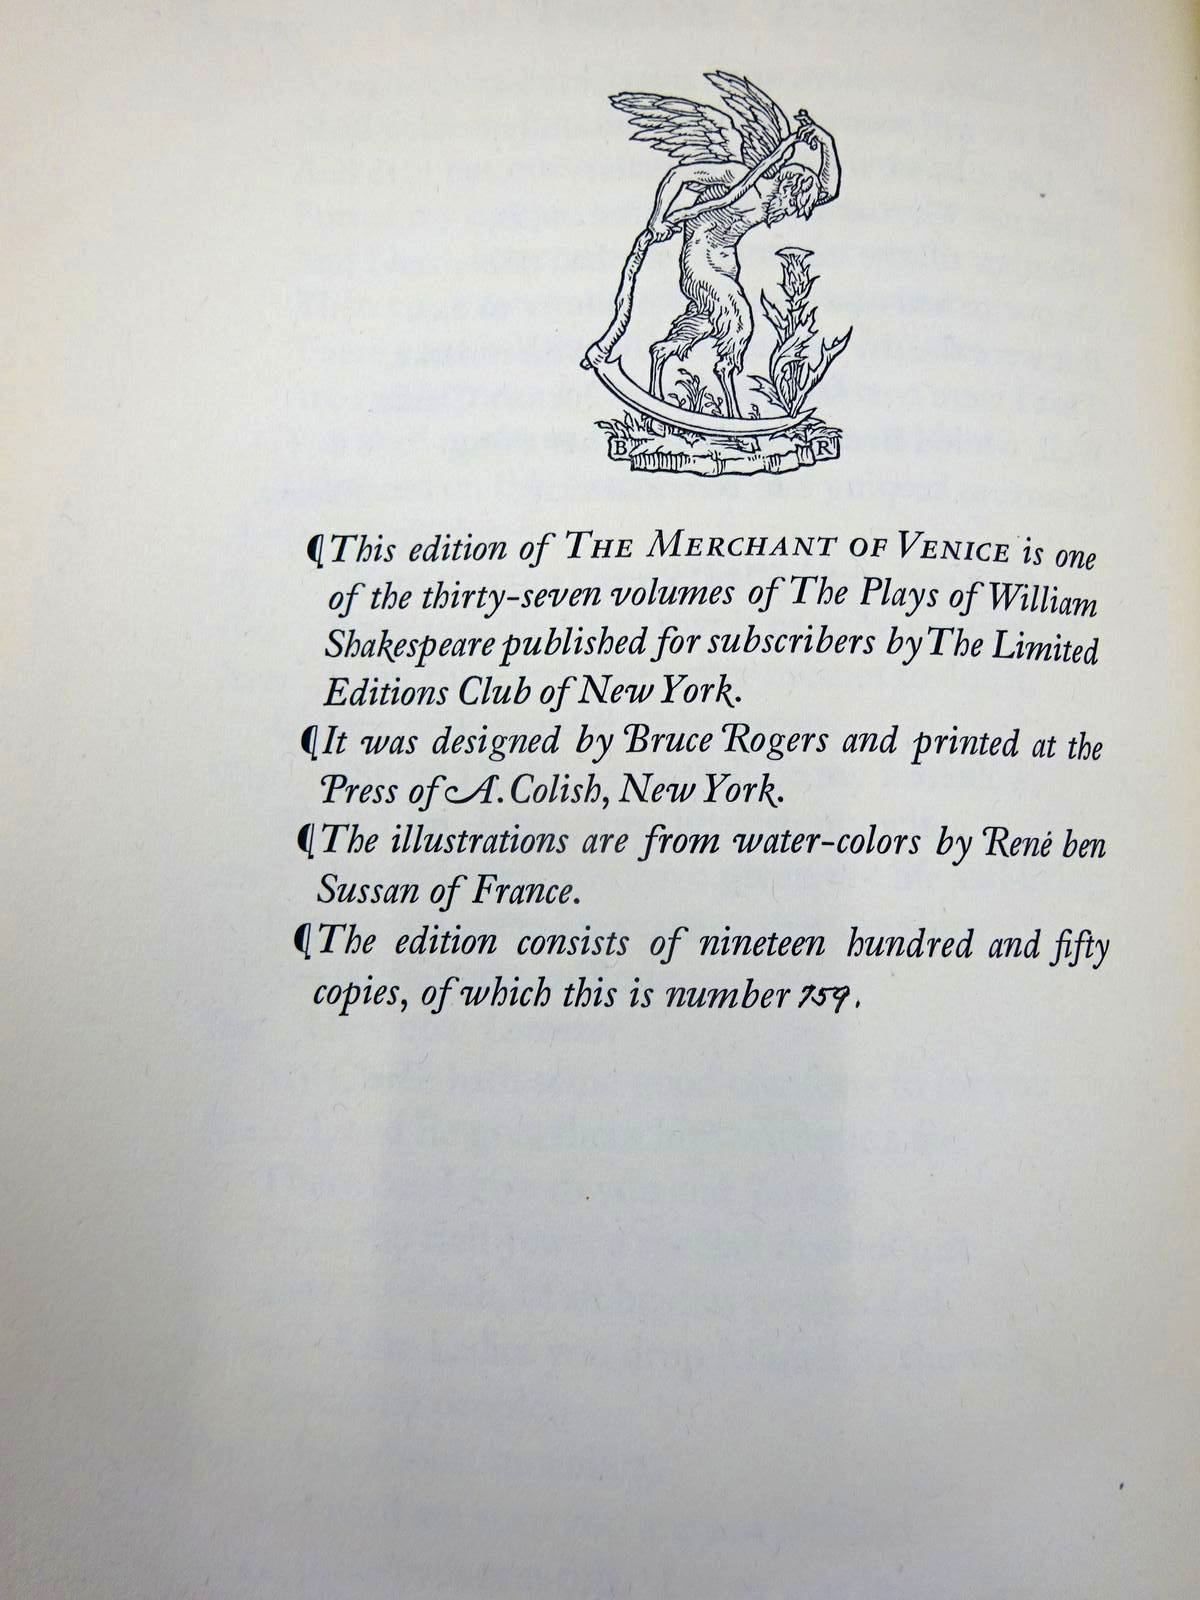 Photo of THE MERCHANT OF VENICE written by Shakespeare, William
Farjeon, Herbert illustrated by Sussan, Rene Ben published by The Limited Editions Club (STOCK CODE: 2130462)  for sale by Stella & Rose's Books